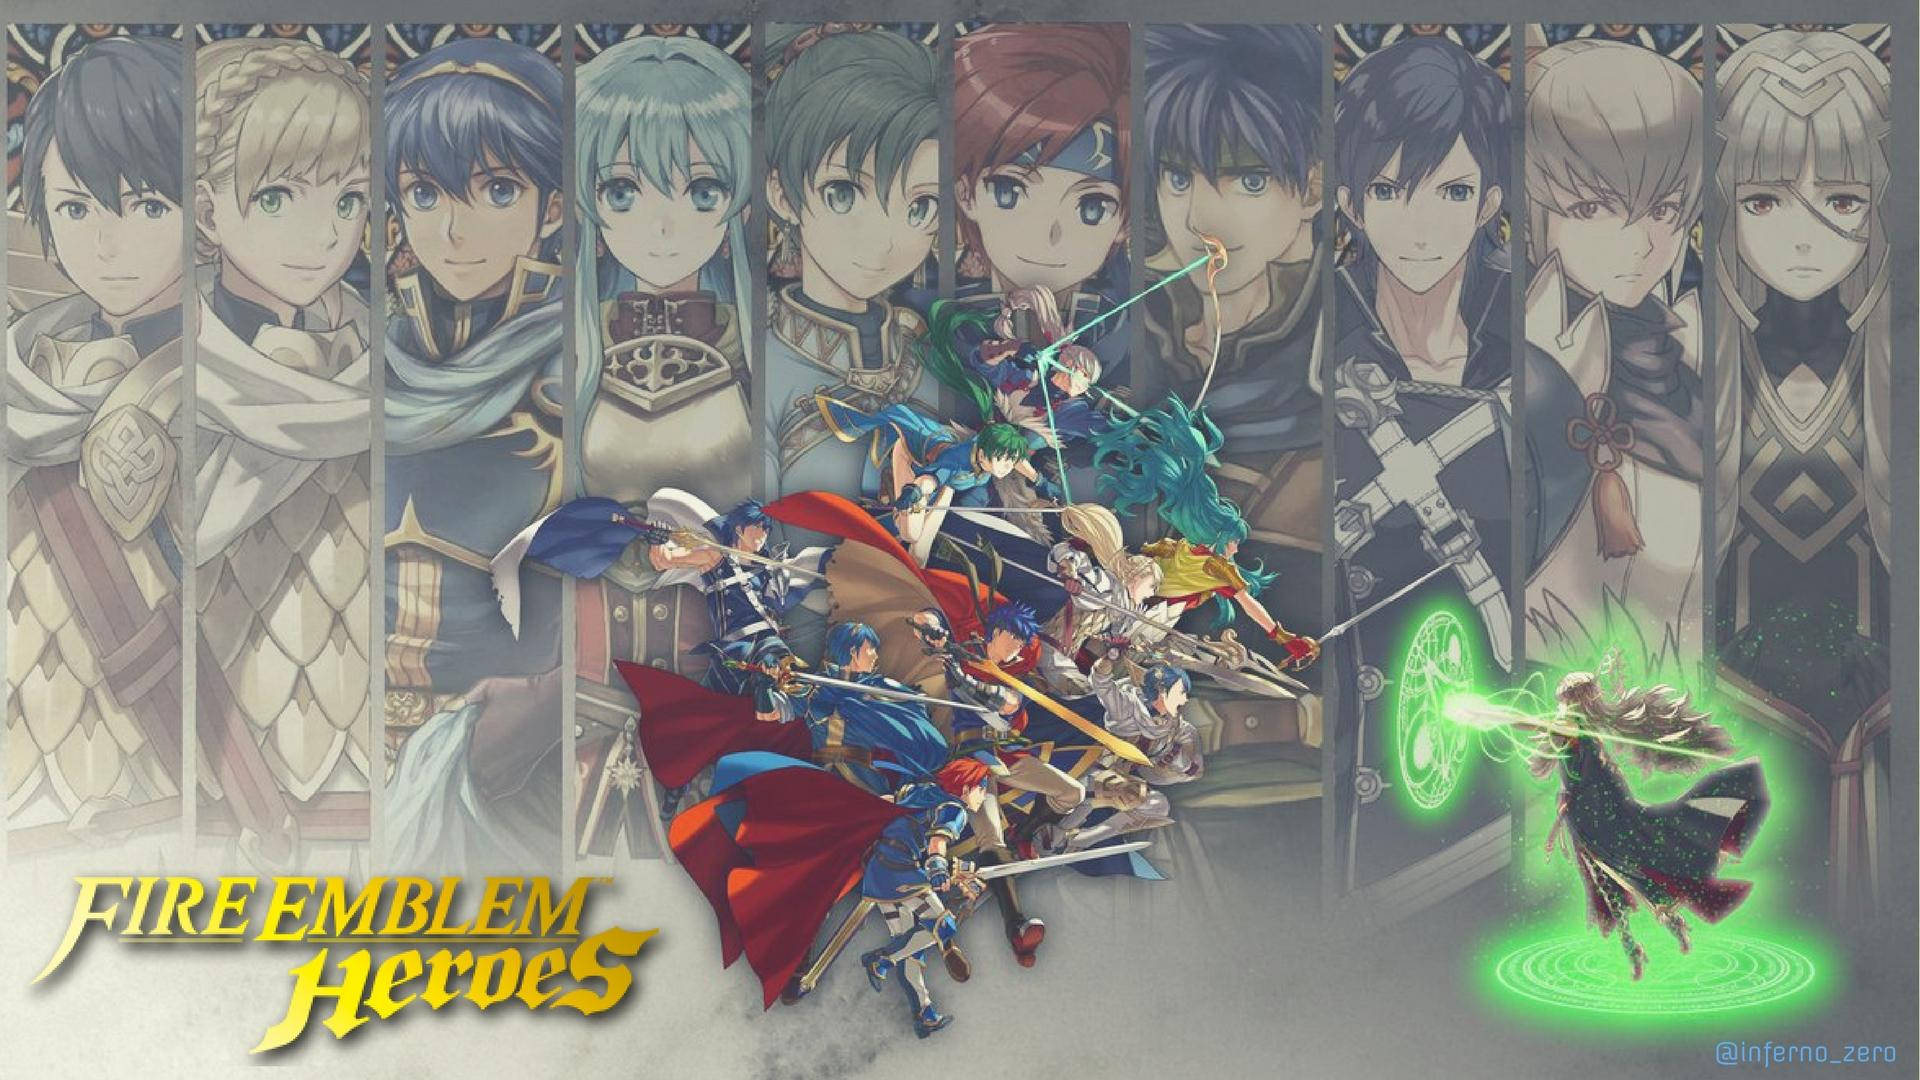 Play Fire Emblem Heroes and see the heroes that the fate of the kingdom depends on Wallpaper